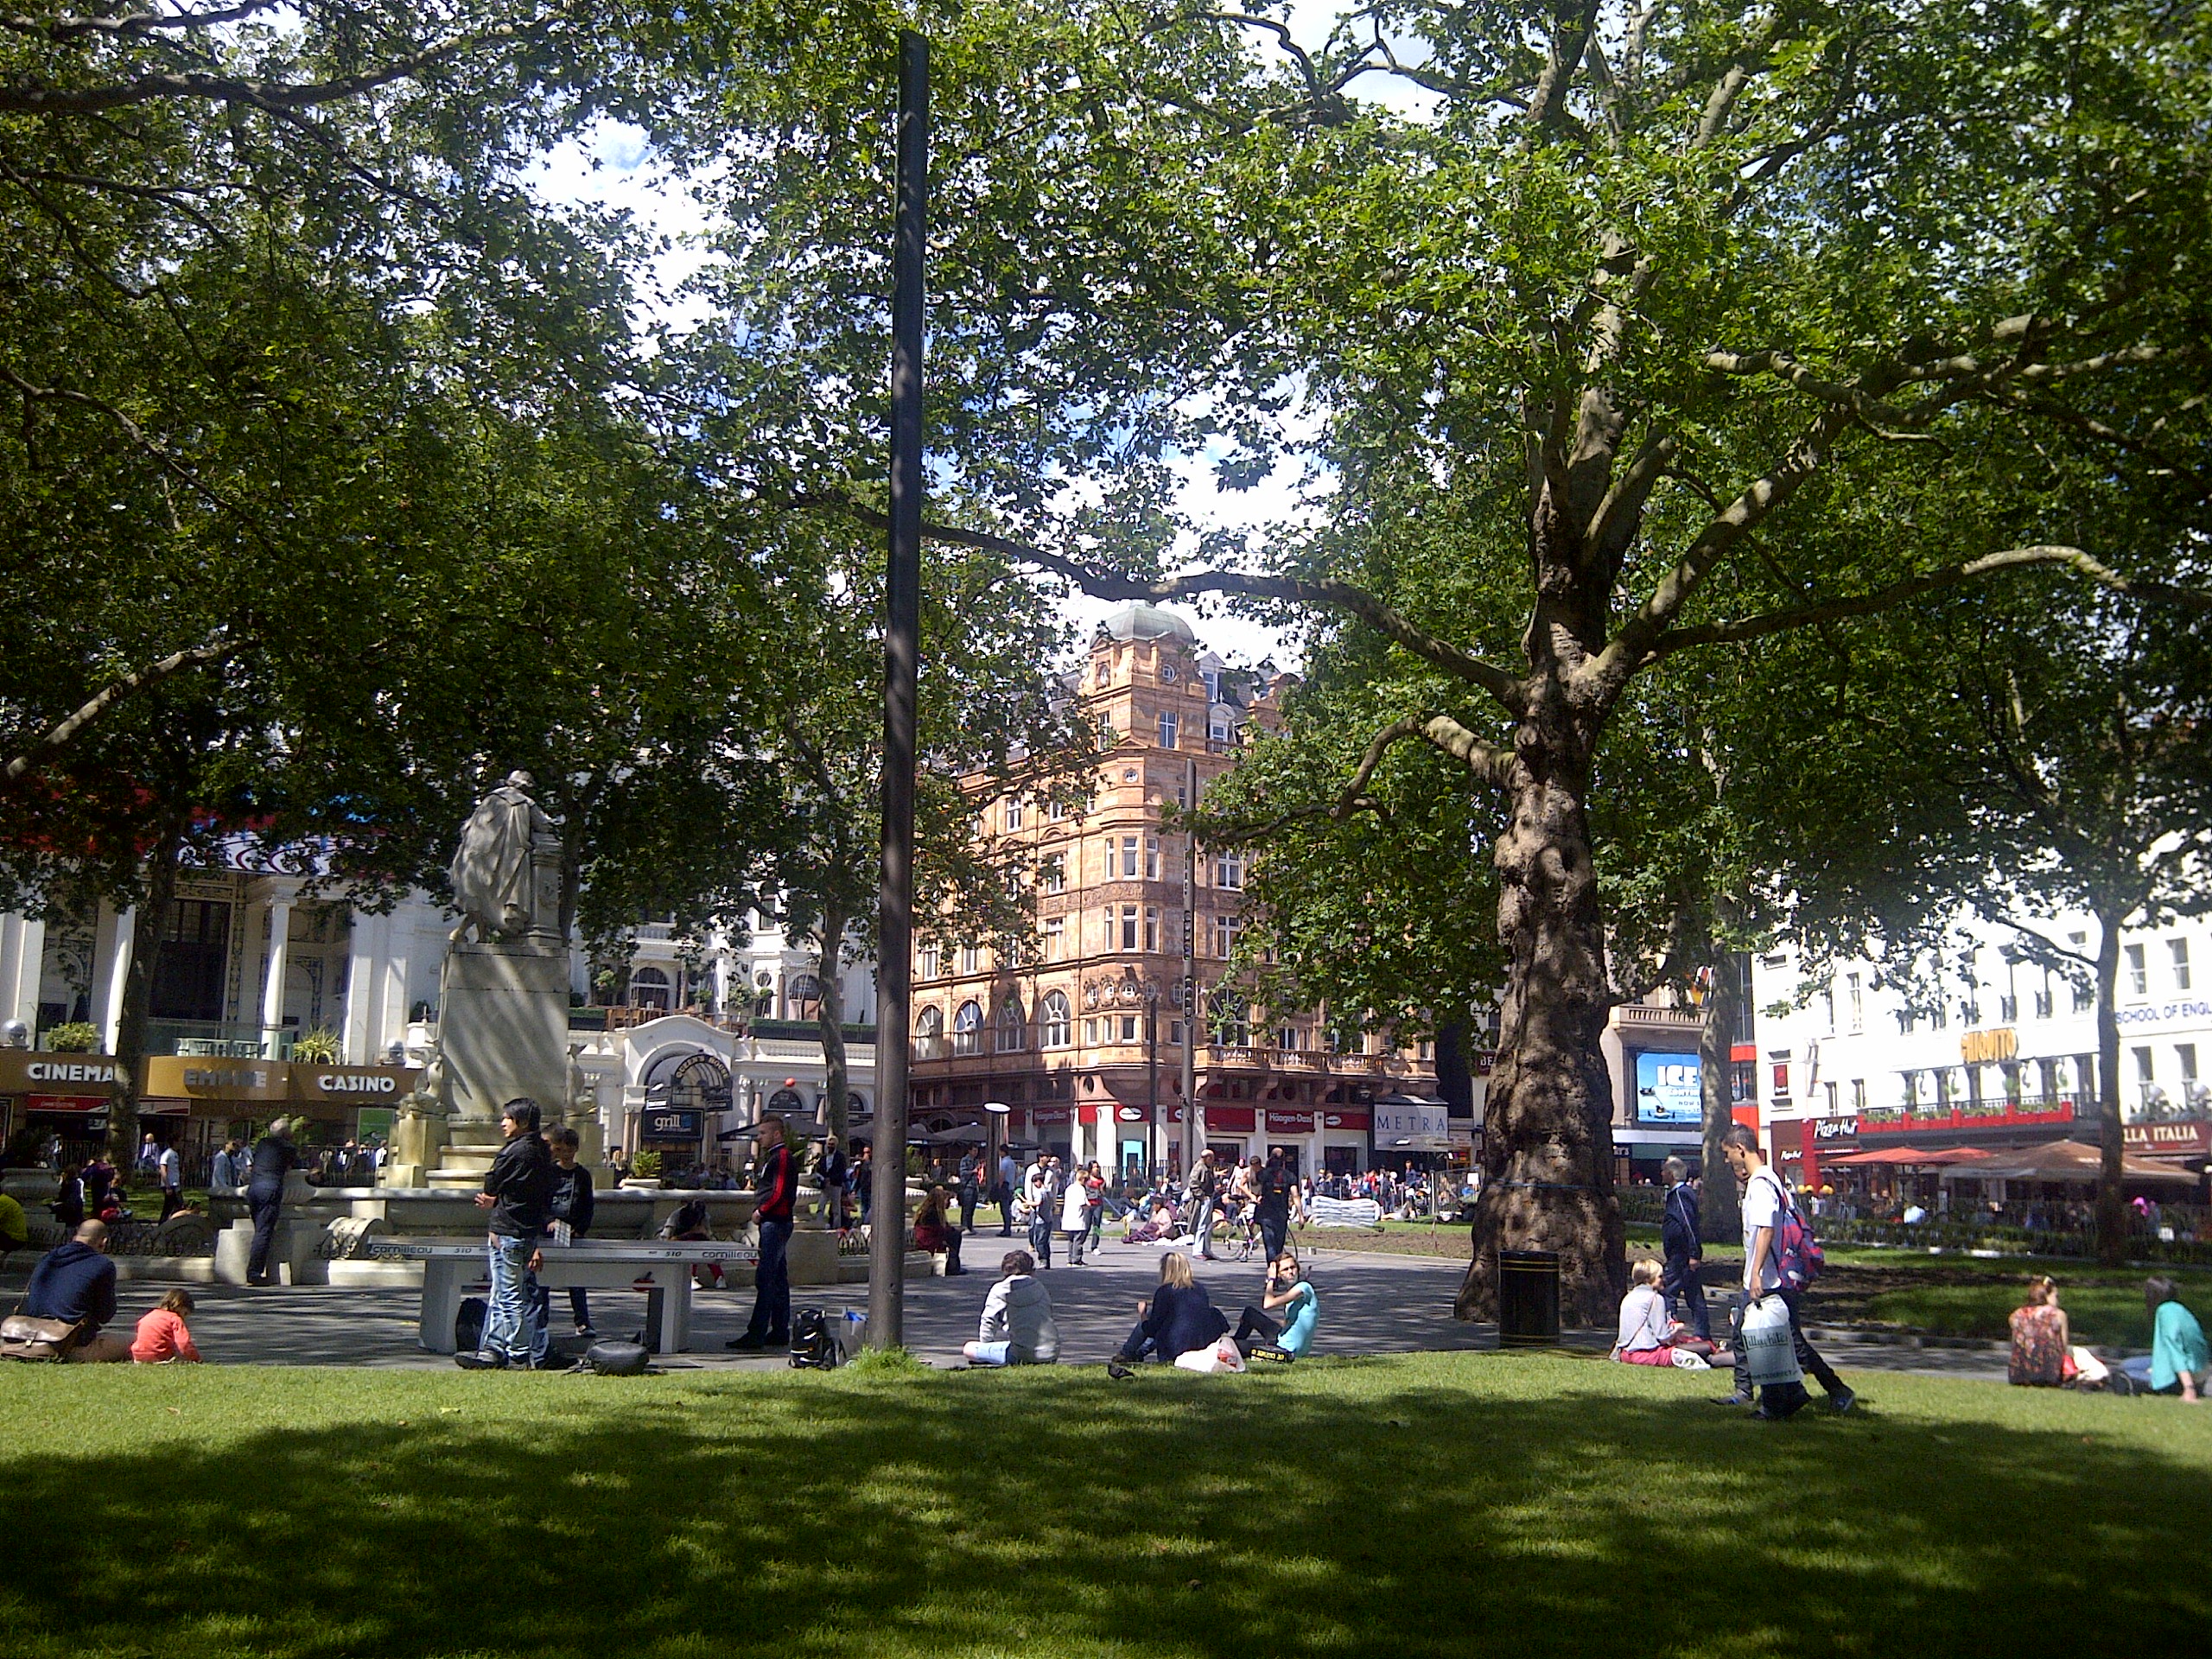 London Places: Ten Random Facts and Figures about Leicester Square You